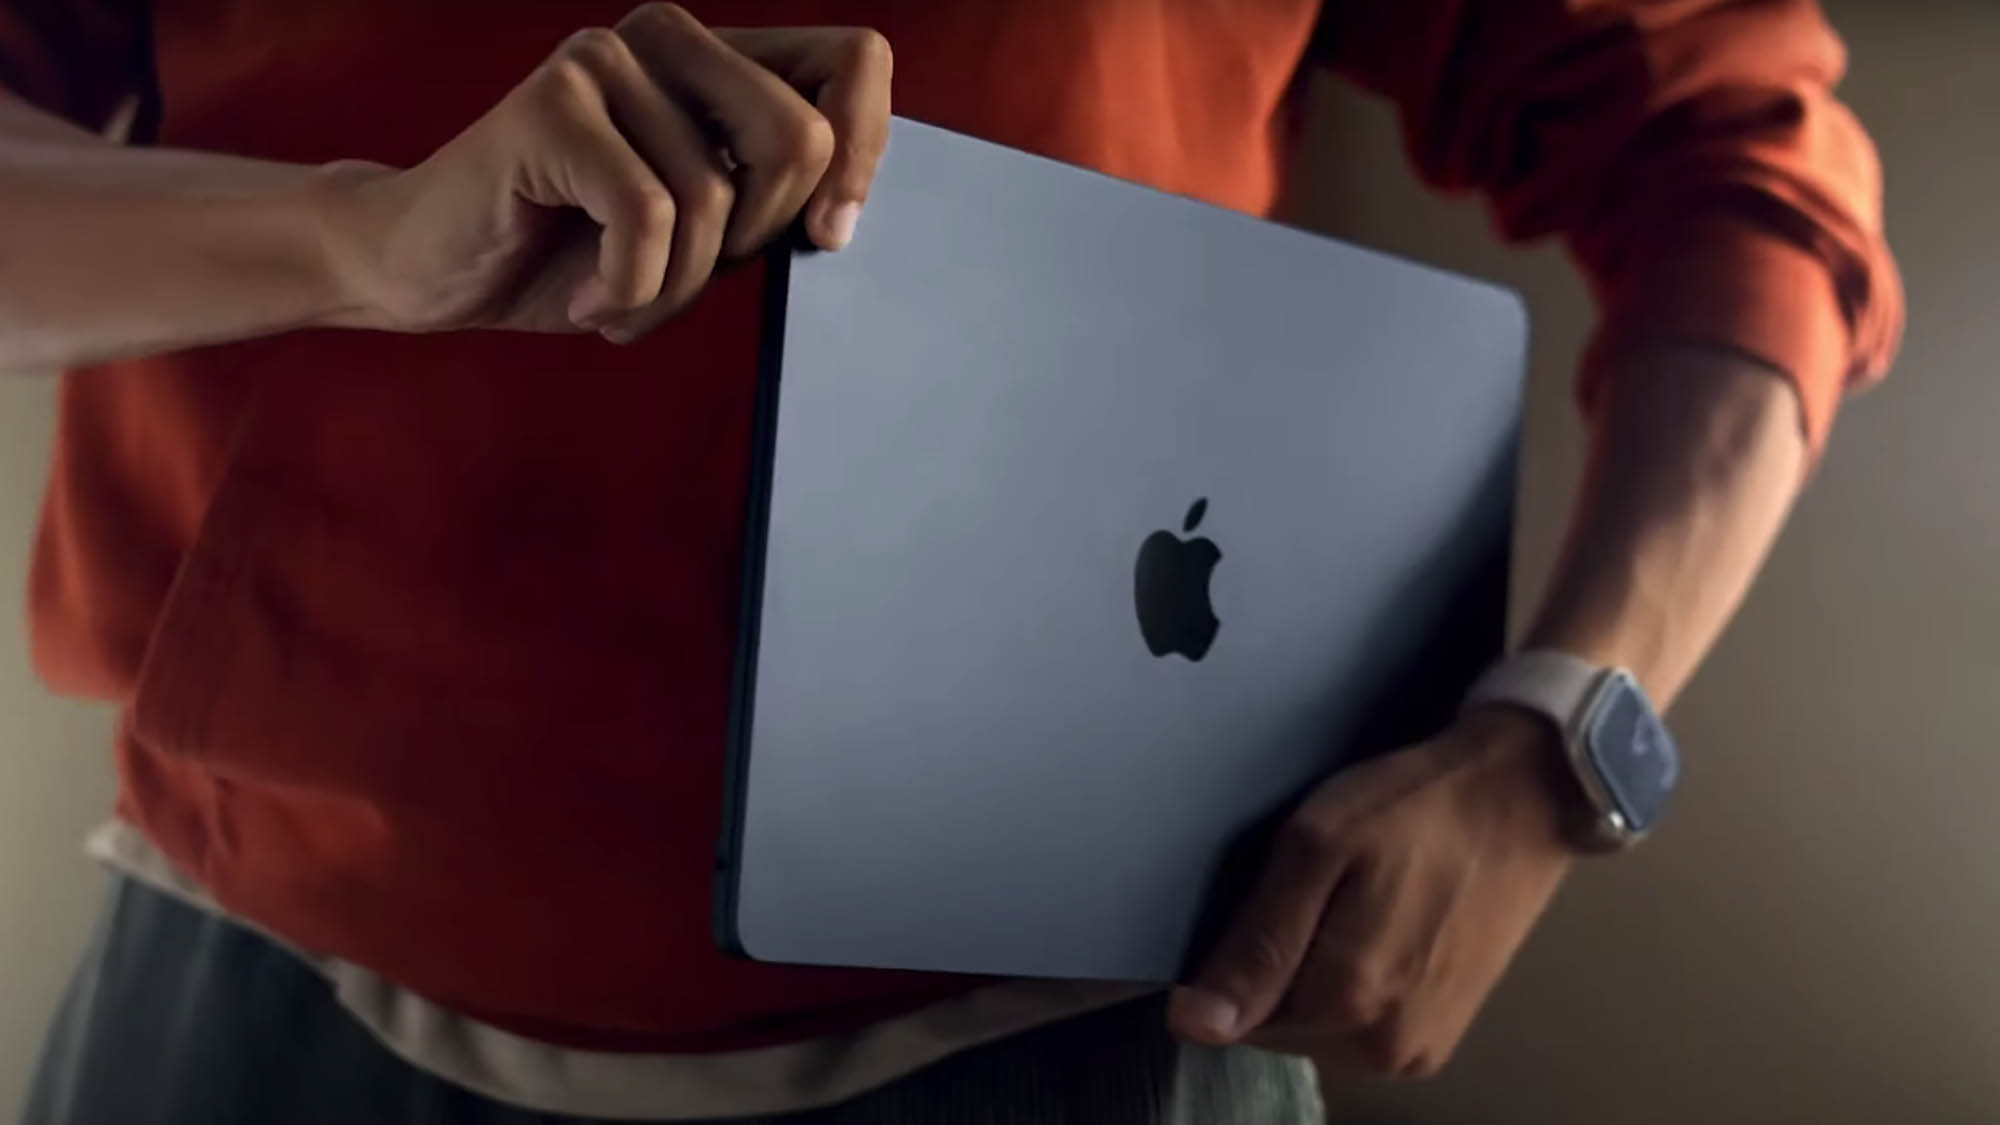 M2 MacBook Air vs. M2 MacBook Pro: Is the Pro worth the extra $100?